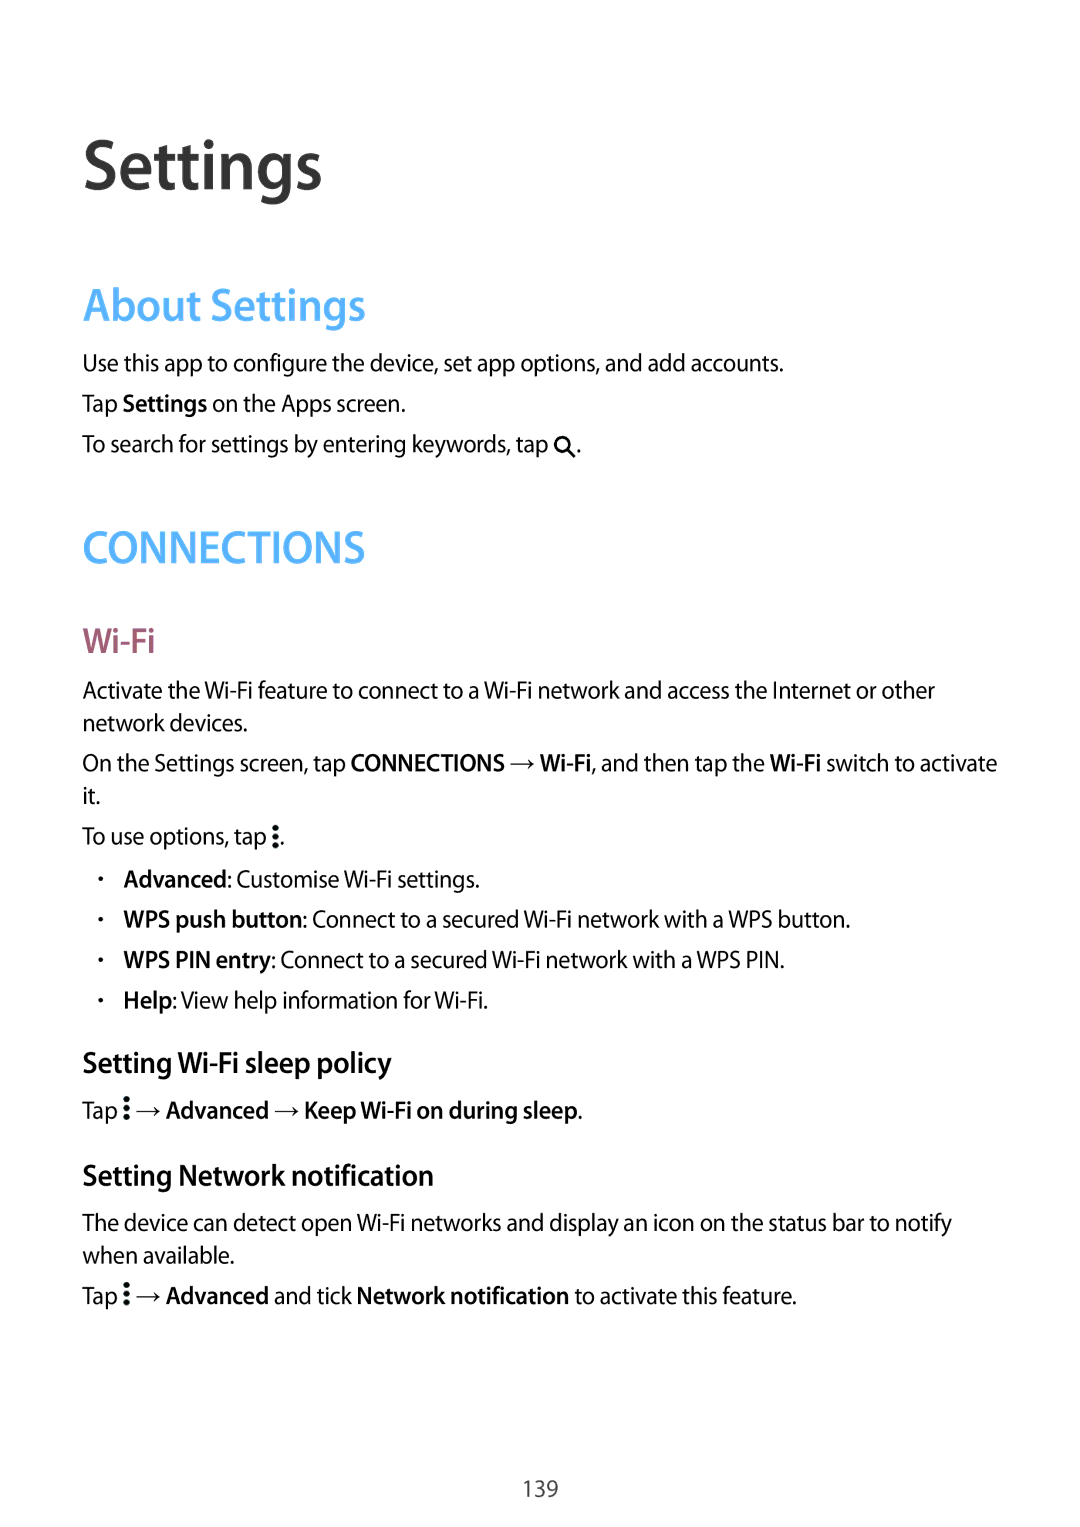 Samsung SM-T800NTSASER, SM-T800NZWAEUR About Settings, Setting Wi-Fi sleep policy, Setting Network notification 